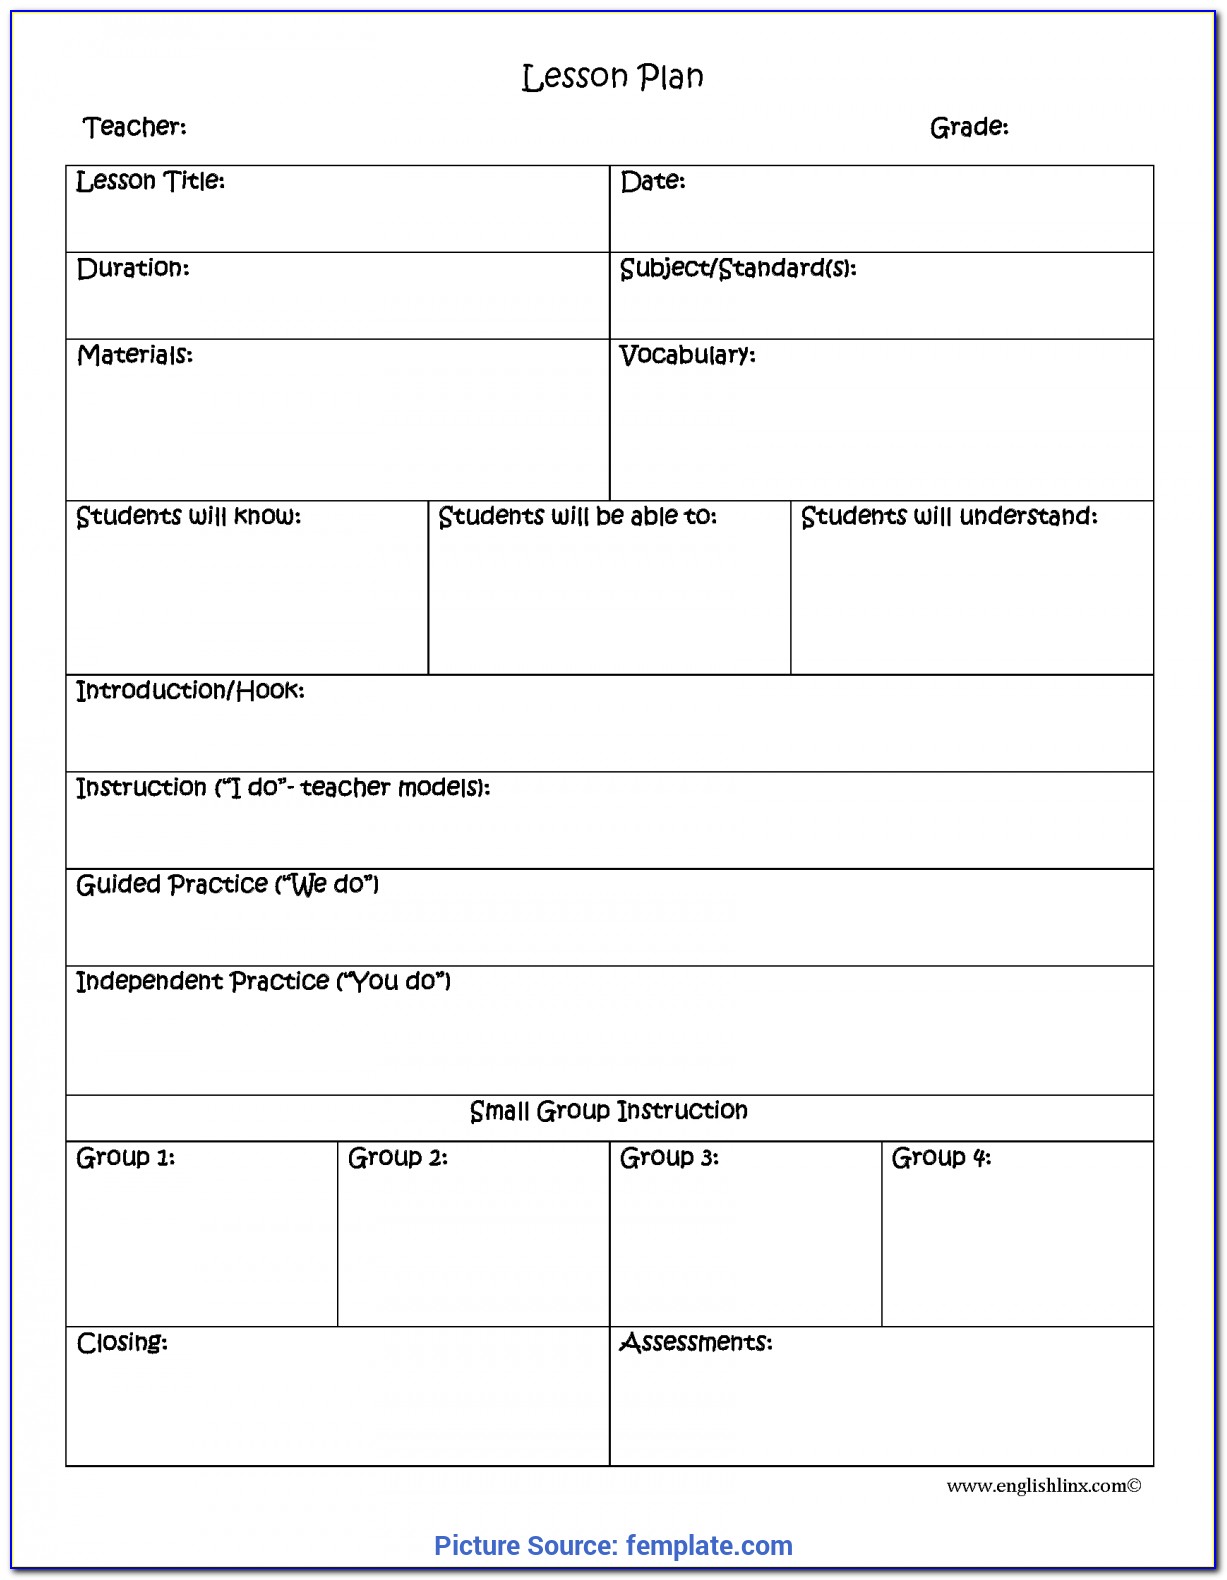 Lesson Plan Template For High School Science Teachers